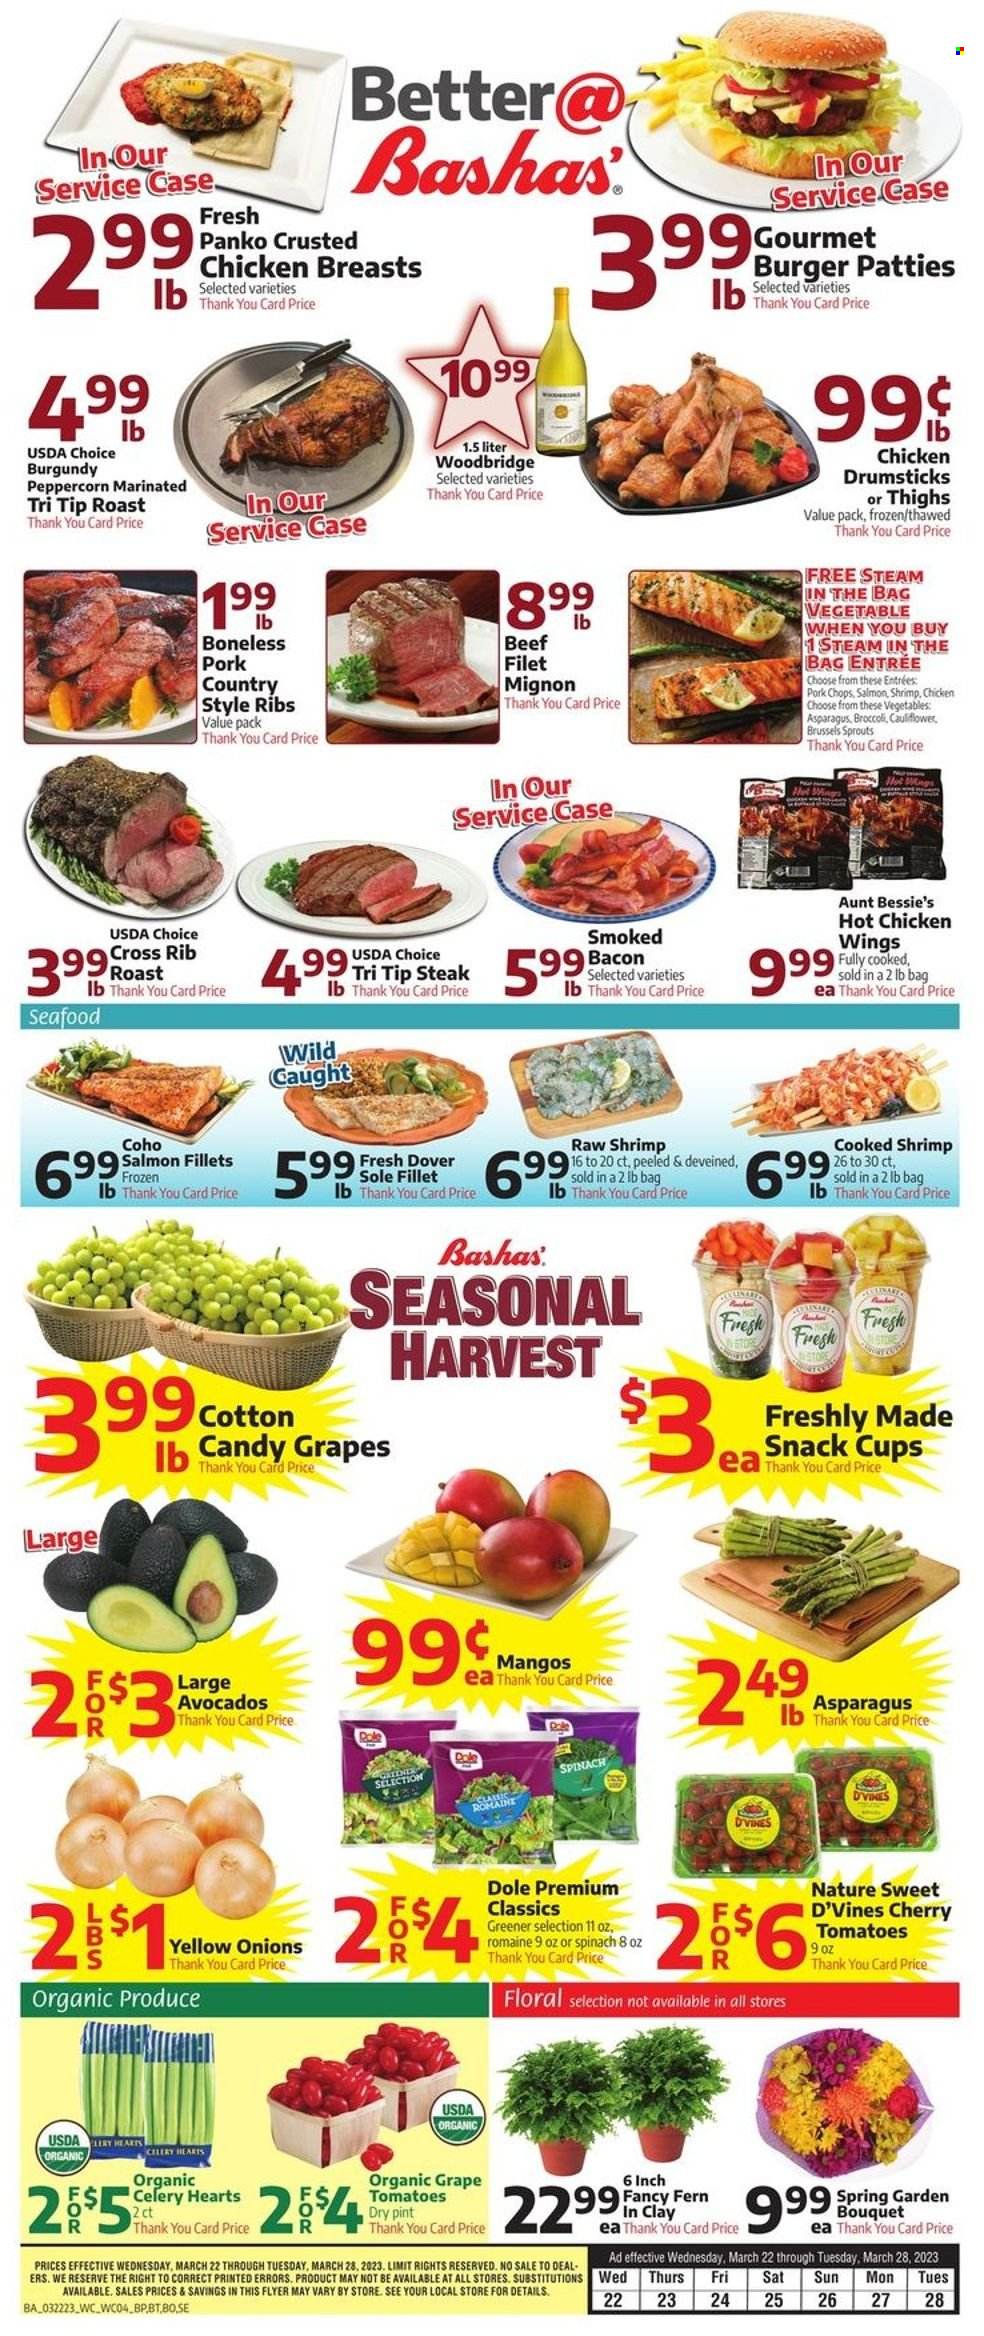 thumbnail - Bashas' Flyer - 03/22/2023 - 03/28/2023 - Sales products - Aunt Bessie's, panko breadcrumbs, asparagus, broccoli, cauliflower, celery, spinach, tomatoes, onion, Dole, brussel sprouts, sleeved celery, avocado, cherries, salmon, salmon fillet, seafood, shrimps, hamburger, roast, bacon, snack, Woodbridge, chicken breasts, chicken drumsticks, chicken, steak, beef tenderloin, ribs, burger patties, pork chops, pork meat, pork ribs, country style ribs, bouquet. Page 4.